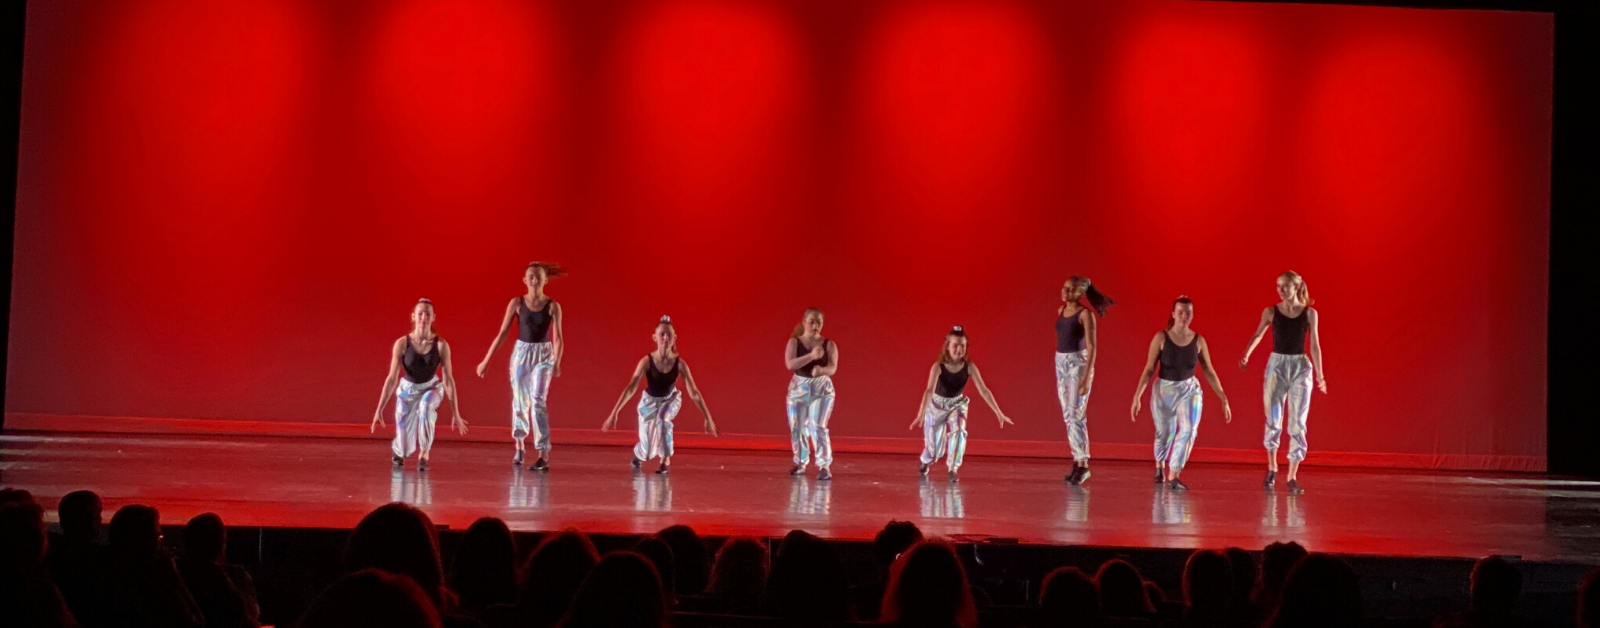 Penny in the center with her dance team performing on stage